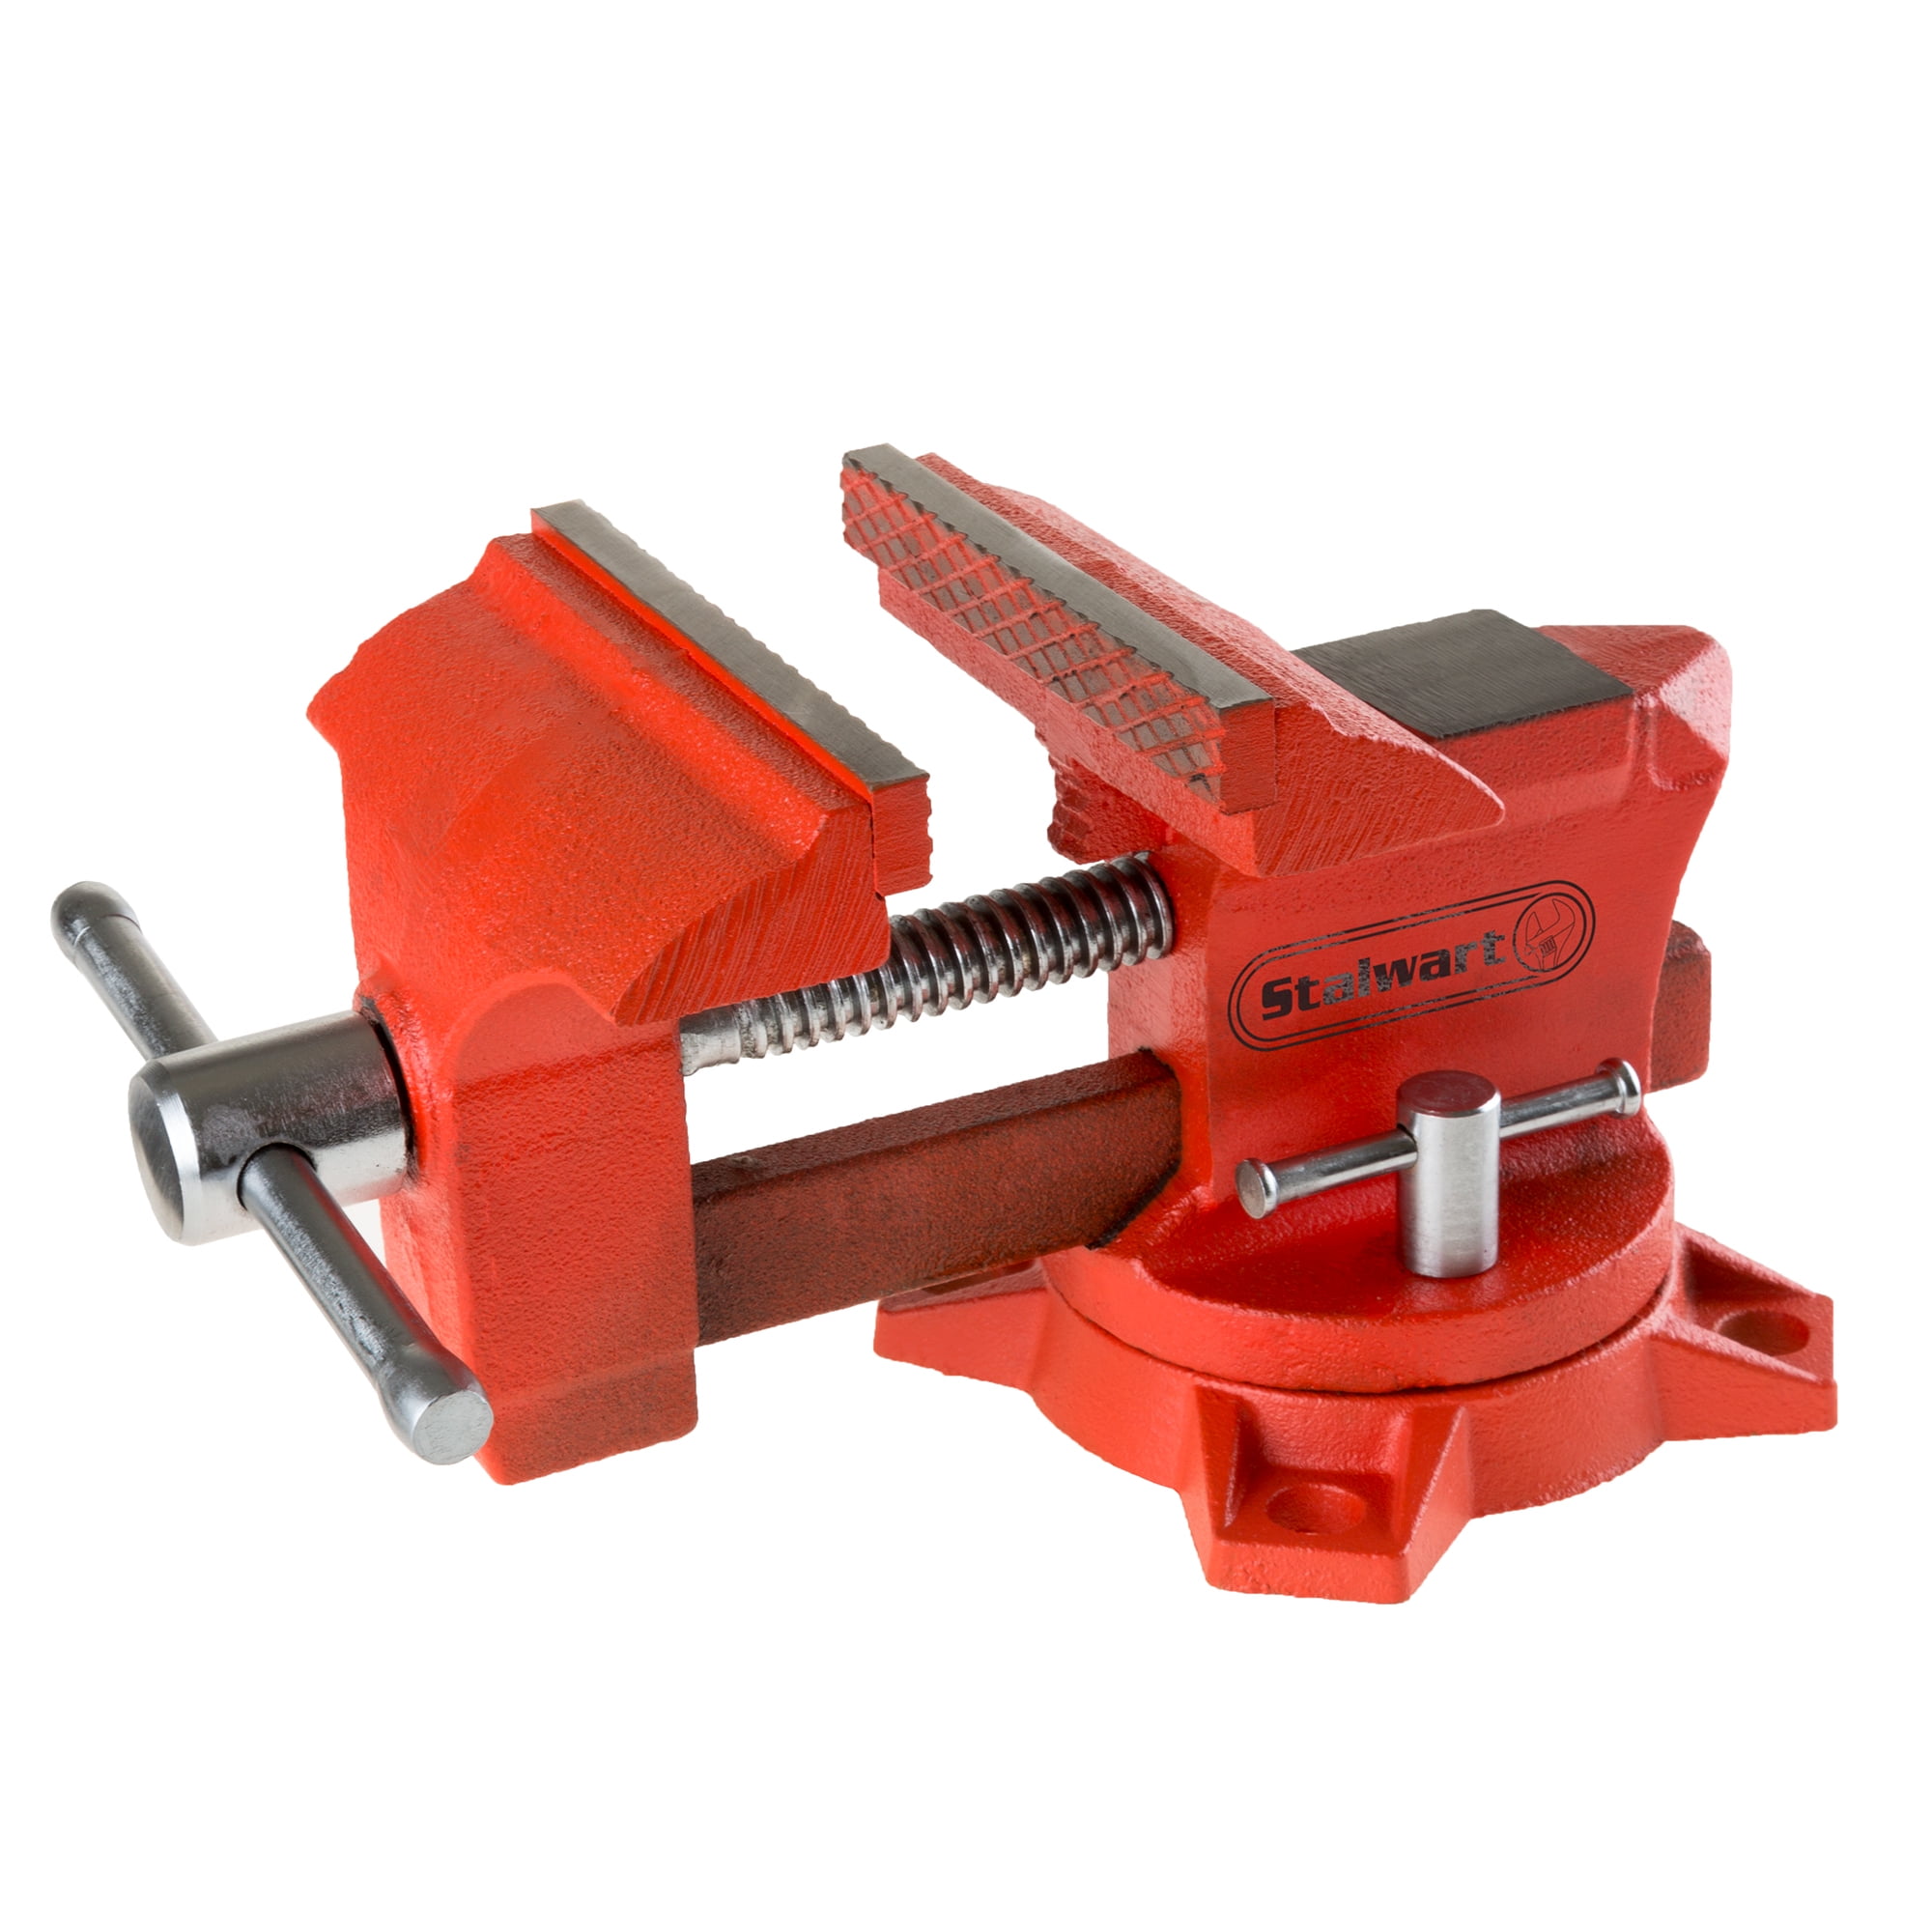 Quick Release Drill Vice 100mm Workshop Garage Clamp Clamping Work Bench New 